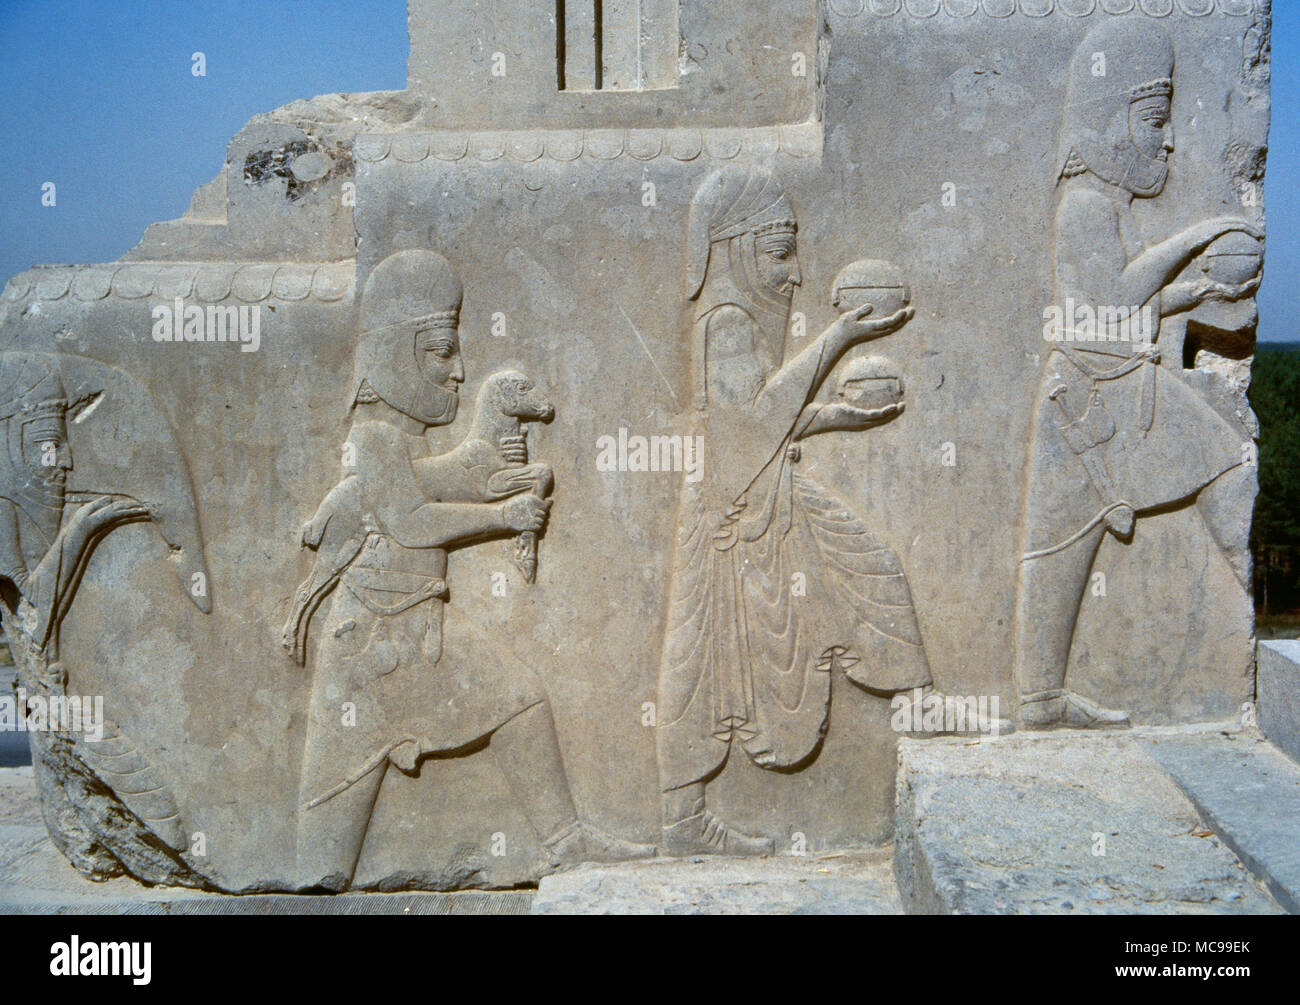 Achaemenid Empire. Persepolis. Apadana, The Audience Hall of Darius. Delivery of tributes to the Persian king by the Cilicians (vassal nation), 5th century BC. Slaves carrying gifts. Islamic Republic of Iran. Stock Photo